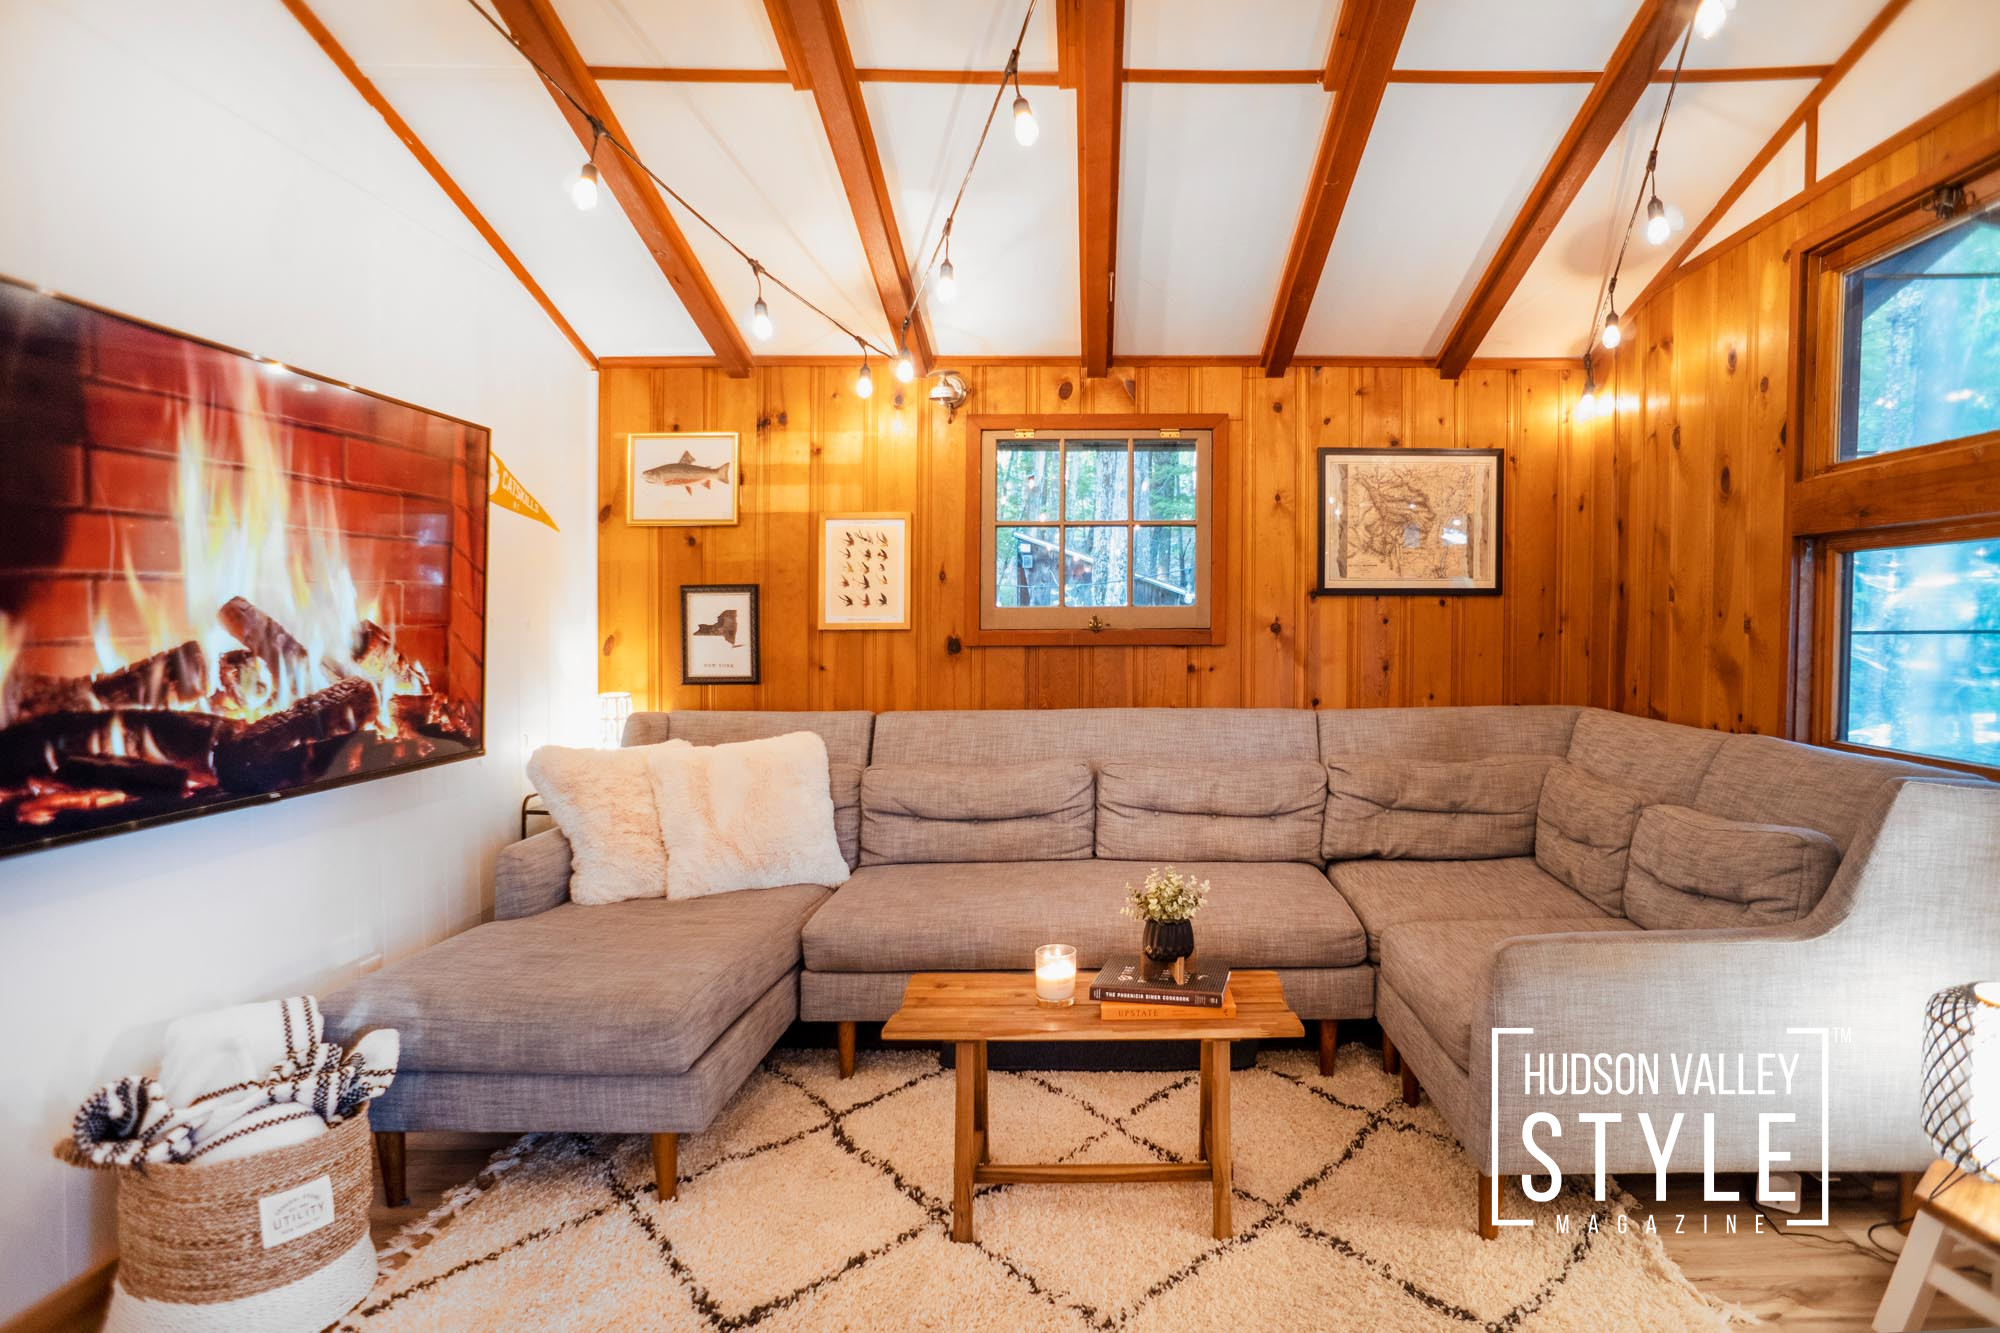 Discover a Cozy Modern Rustic Cabin With Stunning Views of the Catskill Mountains – Presented by Alluvion Vacations – Photography by Maxwell Alexander / Alluvion Media